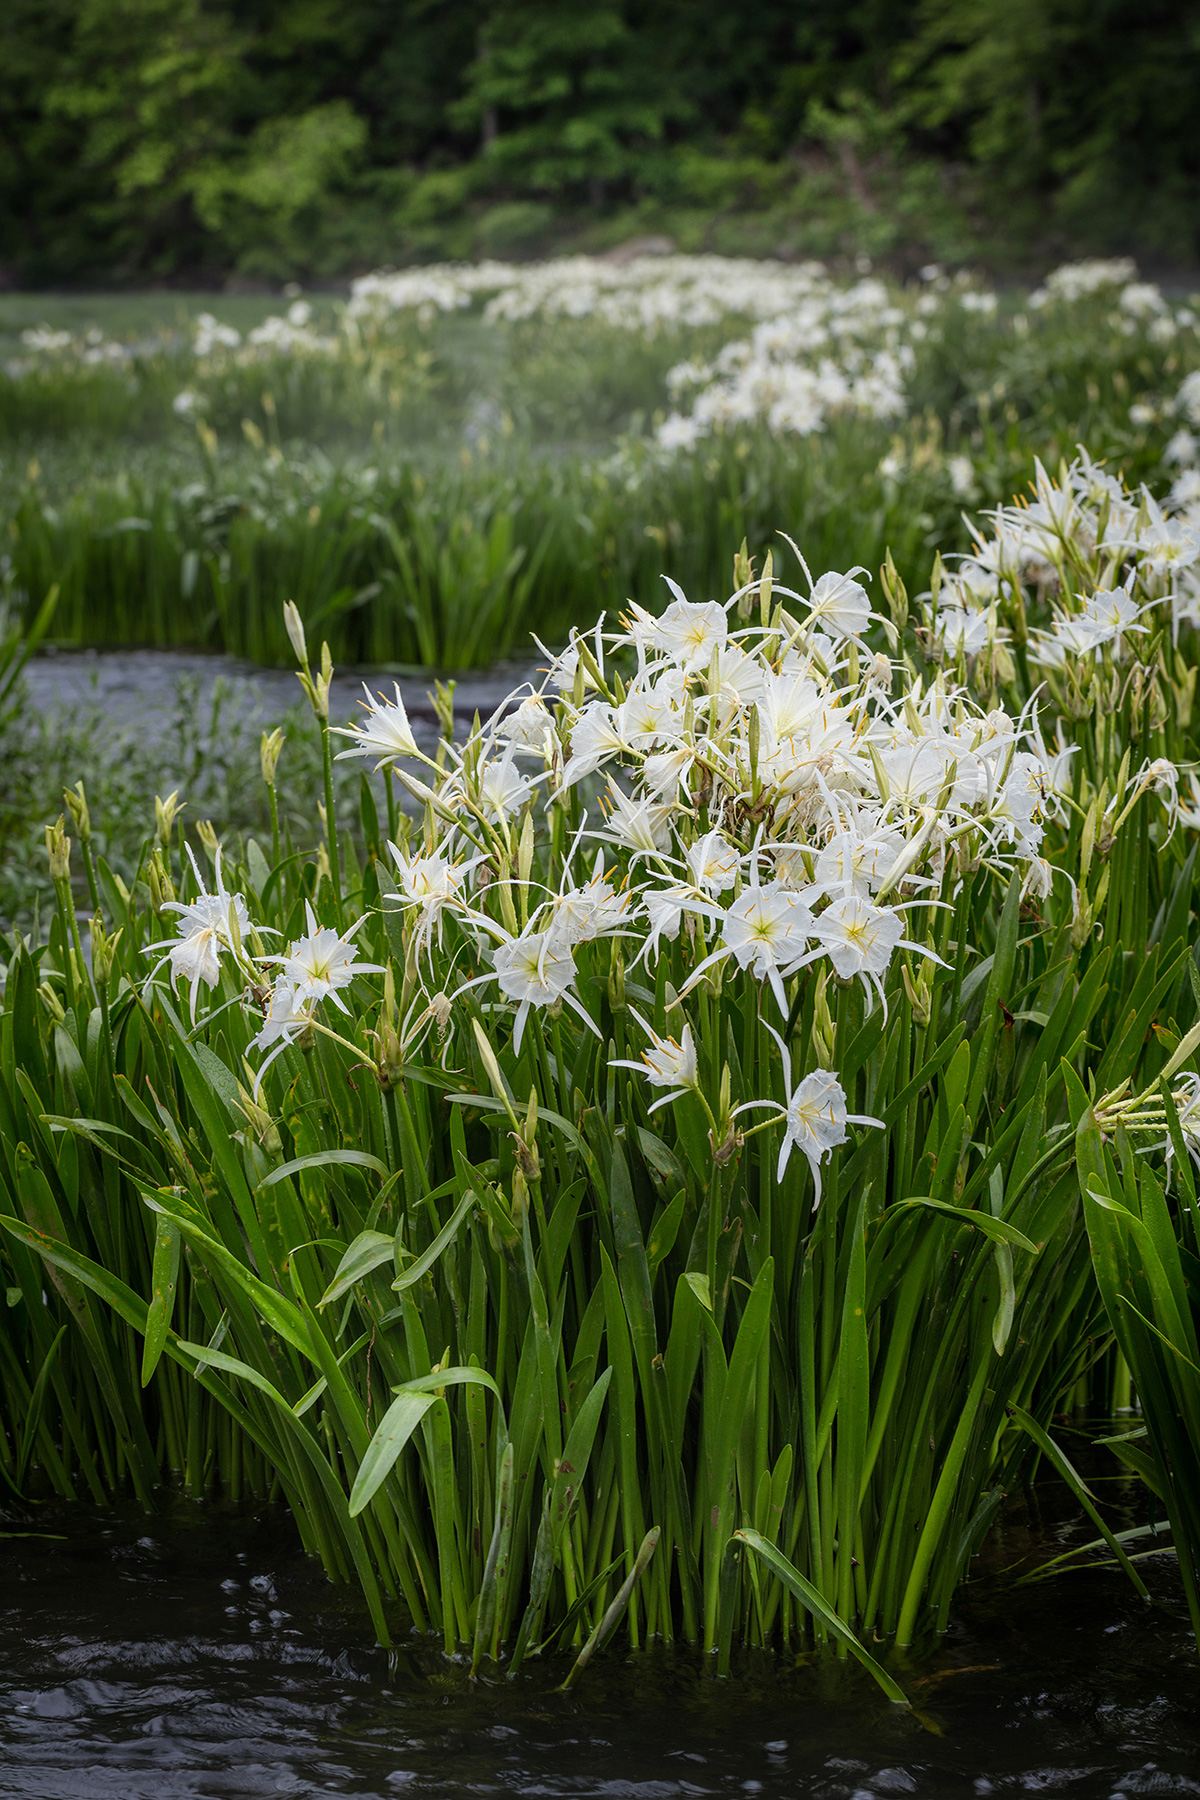 Cahaba lilies in bloom